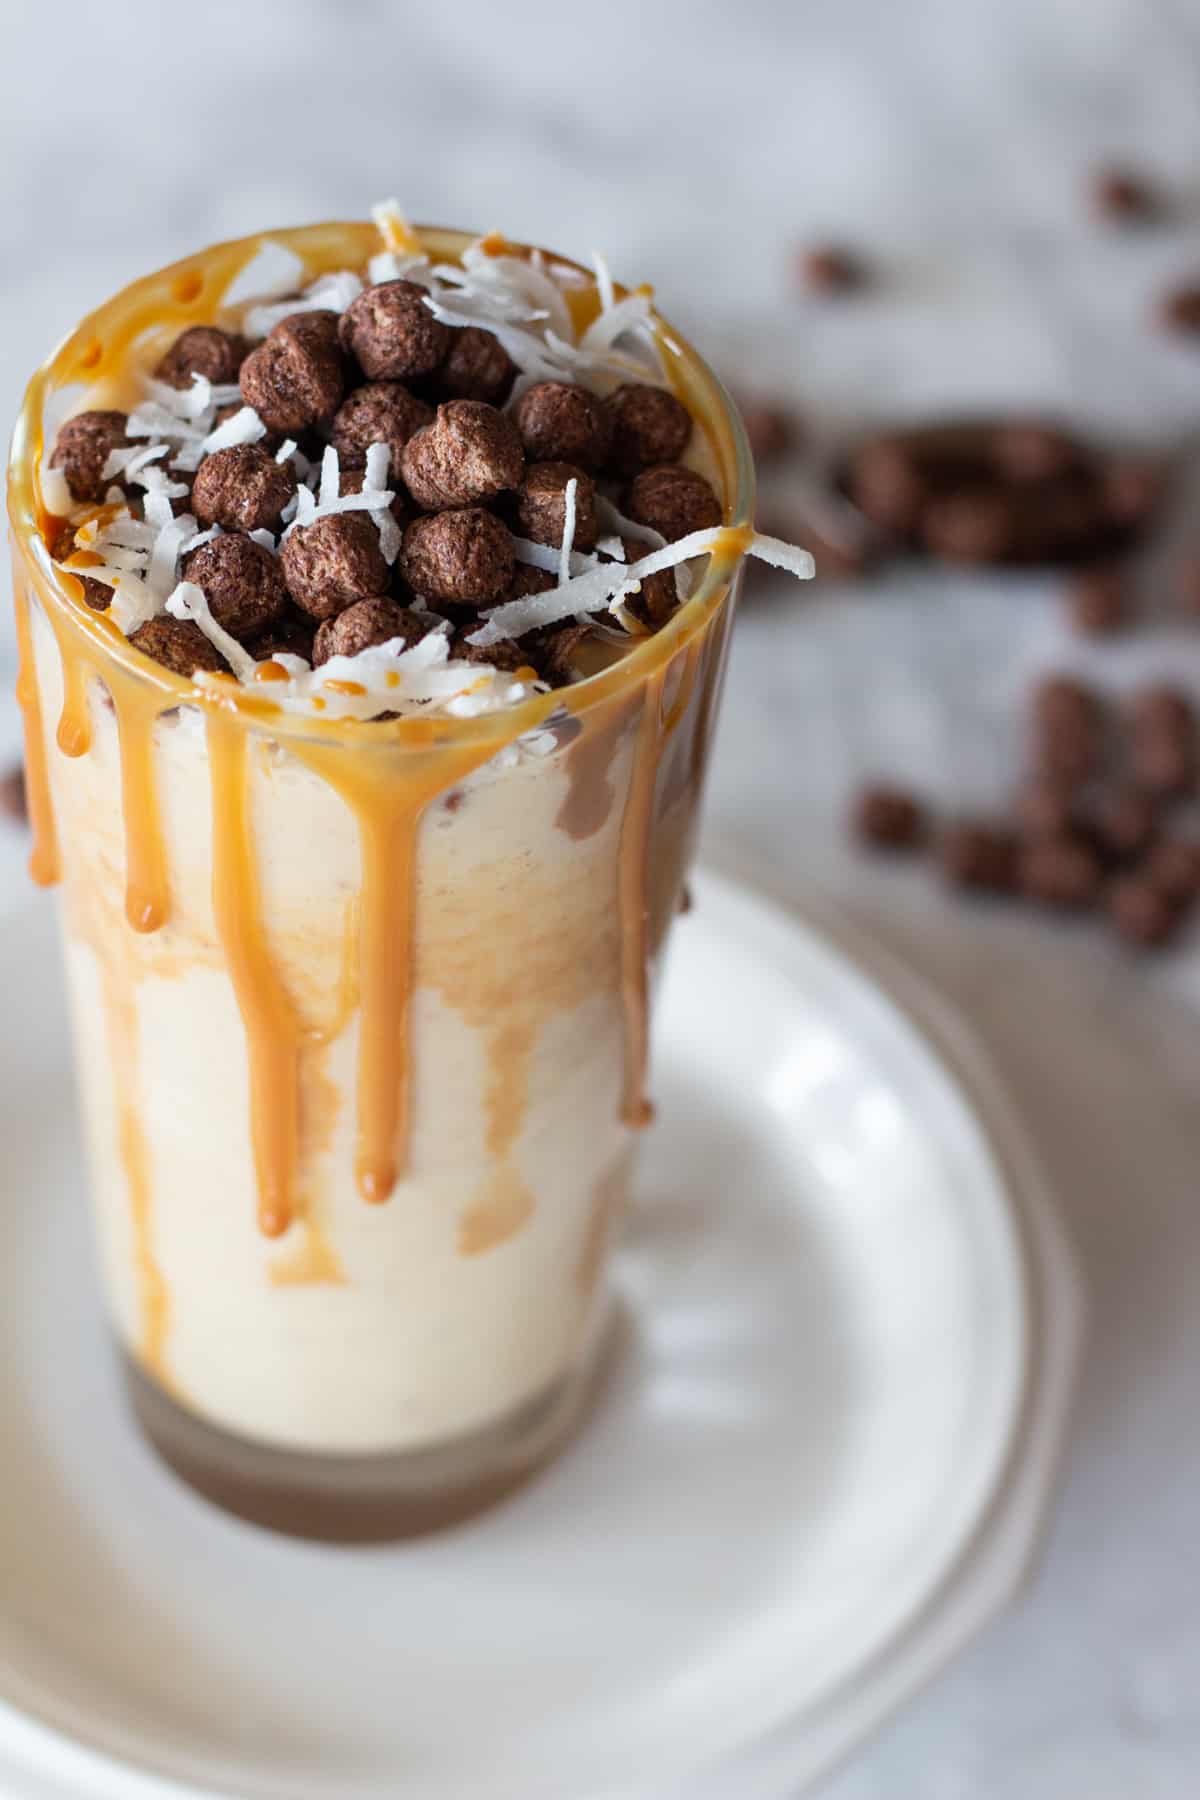 This Banana Peanut Butter Coco Puff Milkshake will make your breakfast more exciting and delicious because it has all the best flavor combinations in one tall glass! 